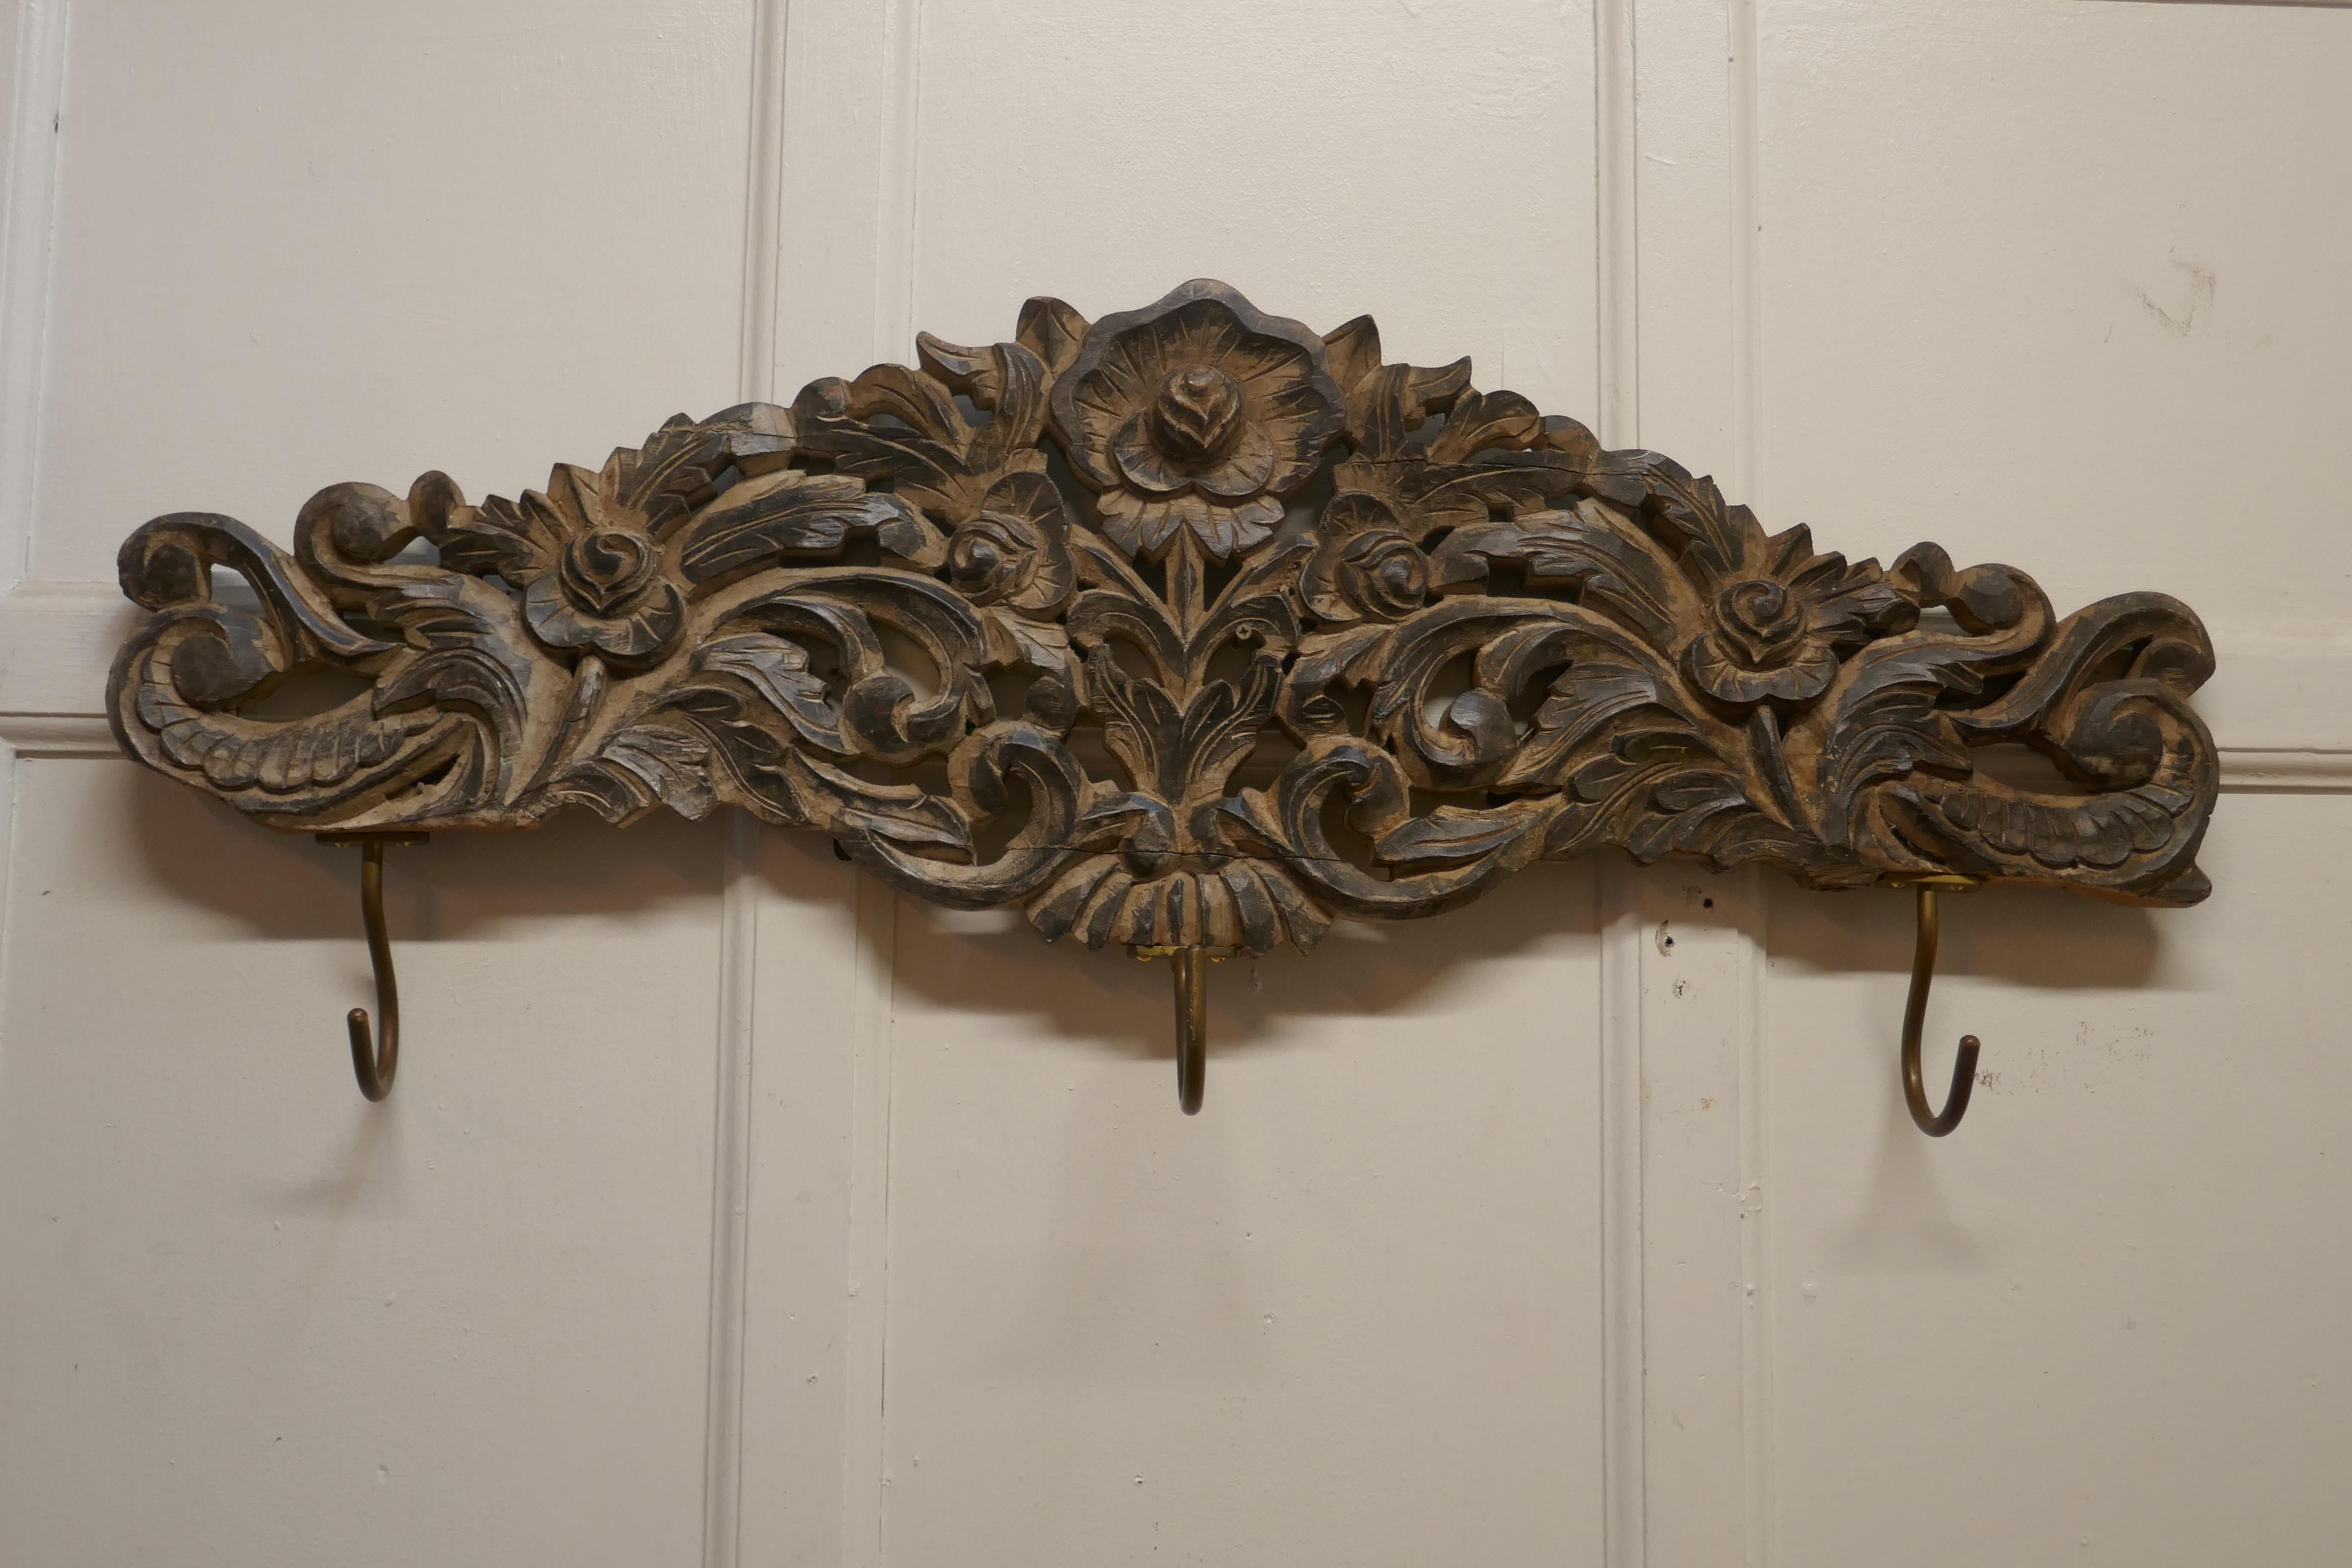 Deeply carved hat and coat hooks rack

This is a solid piece, carved with Flowers and Leaves, it has 3 oversized brass hooks at the bottom. 
The rack is 6” deep, 40” long and 17” high
AC281.